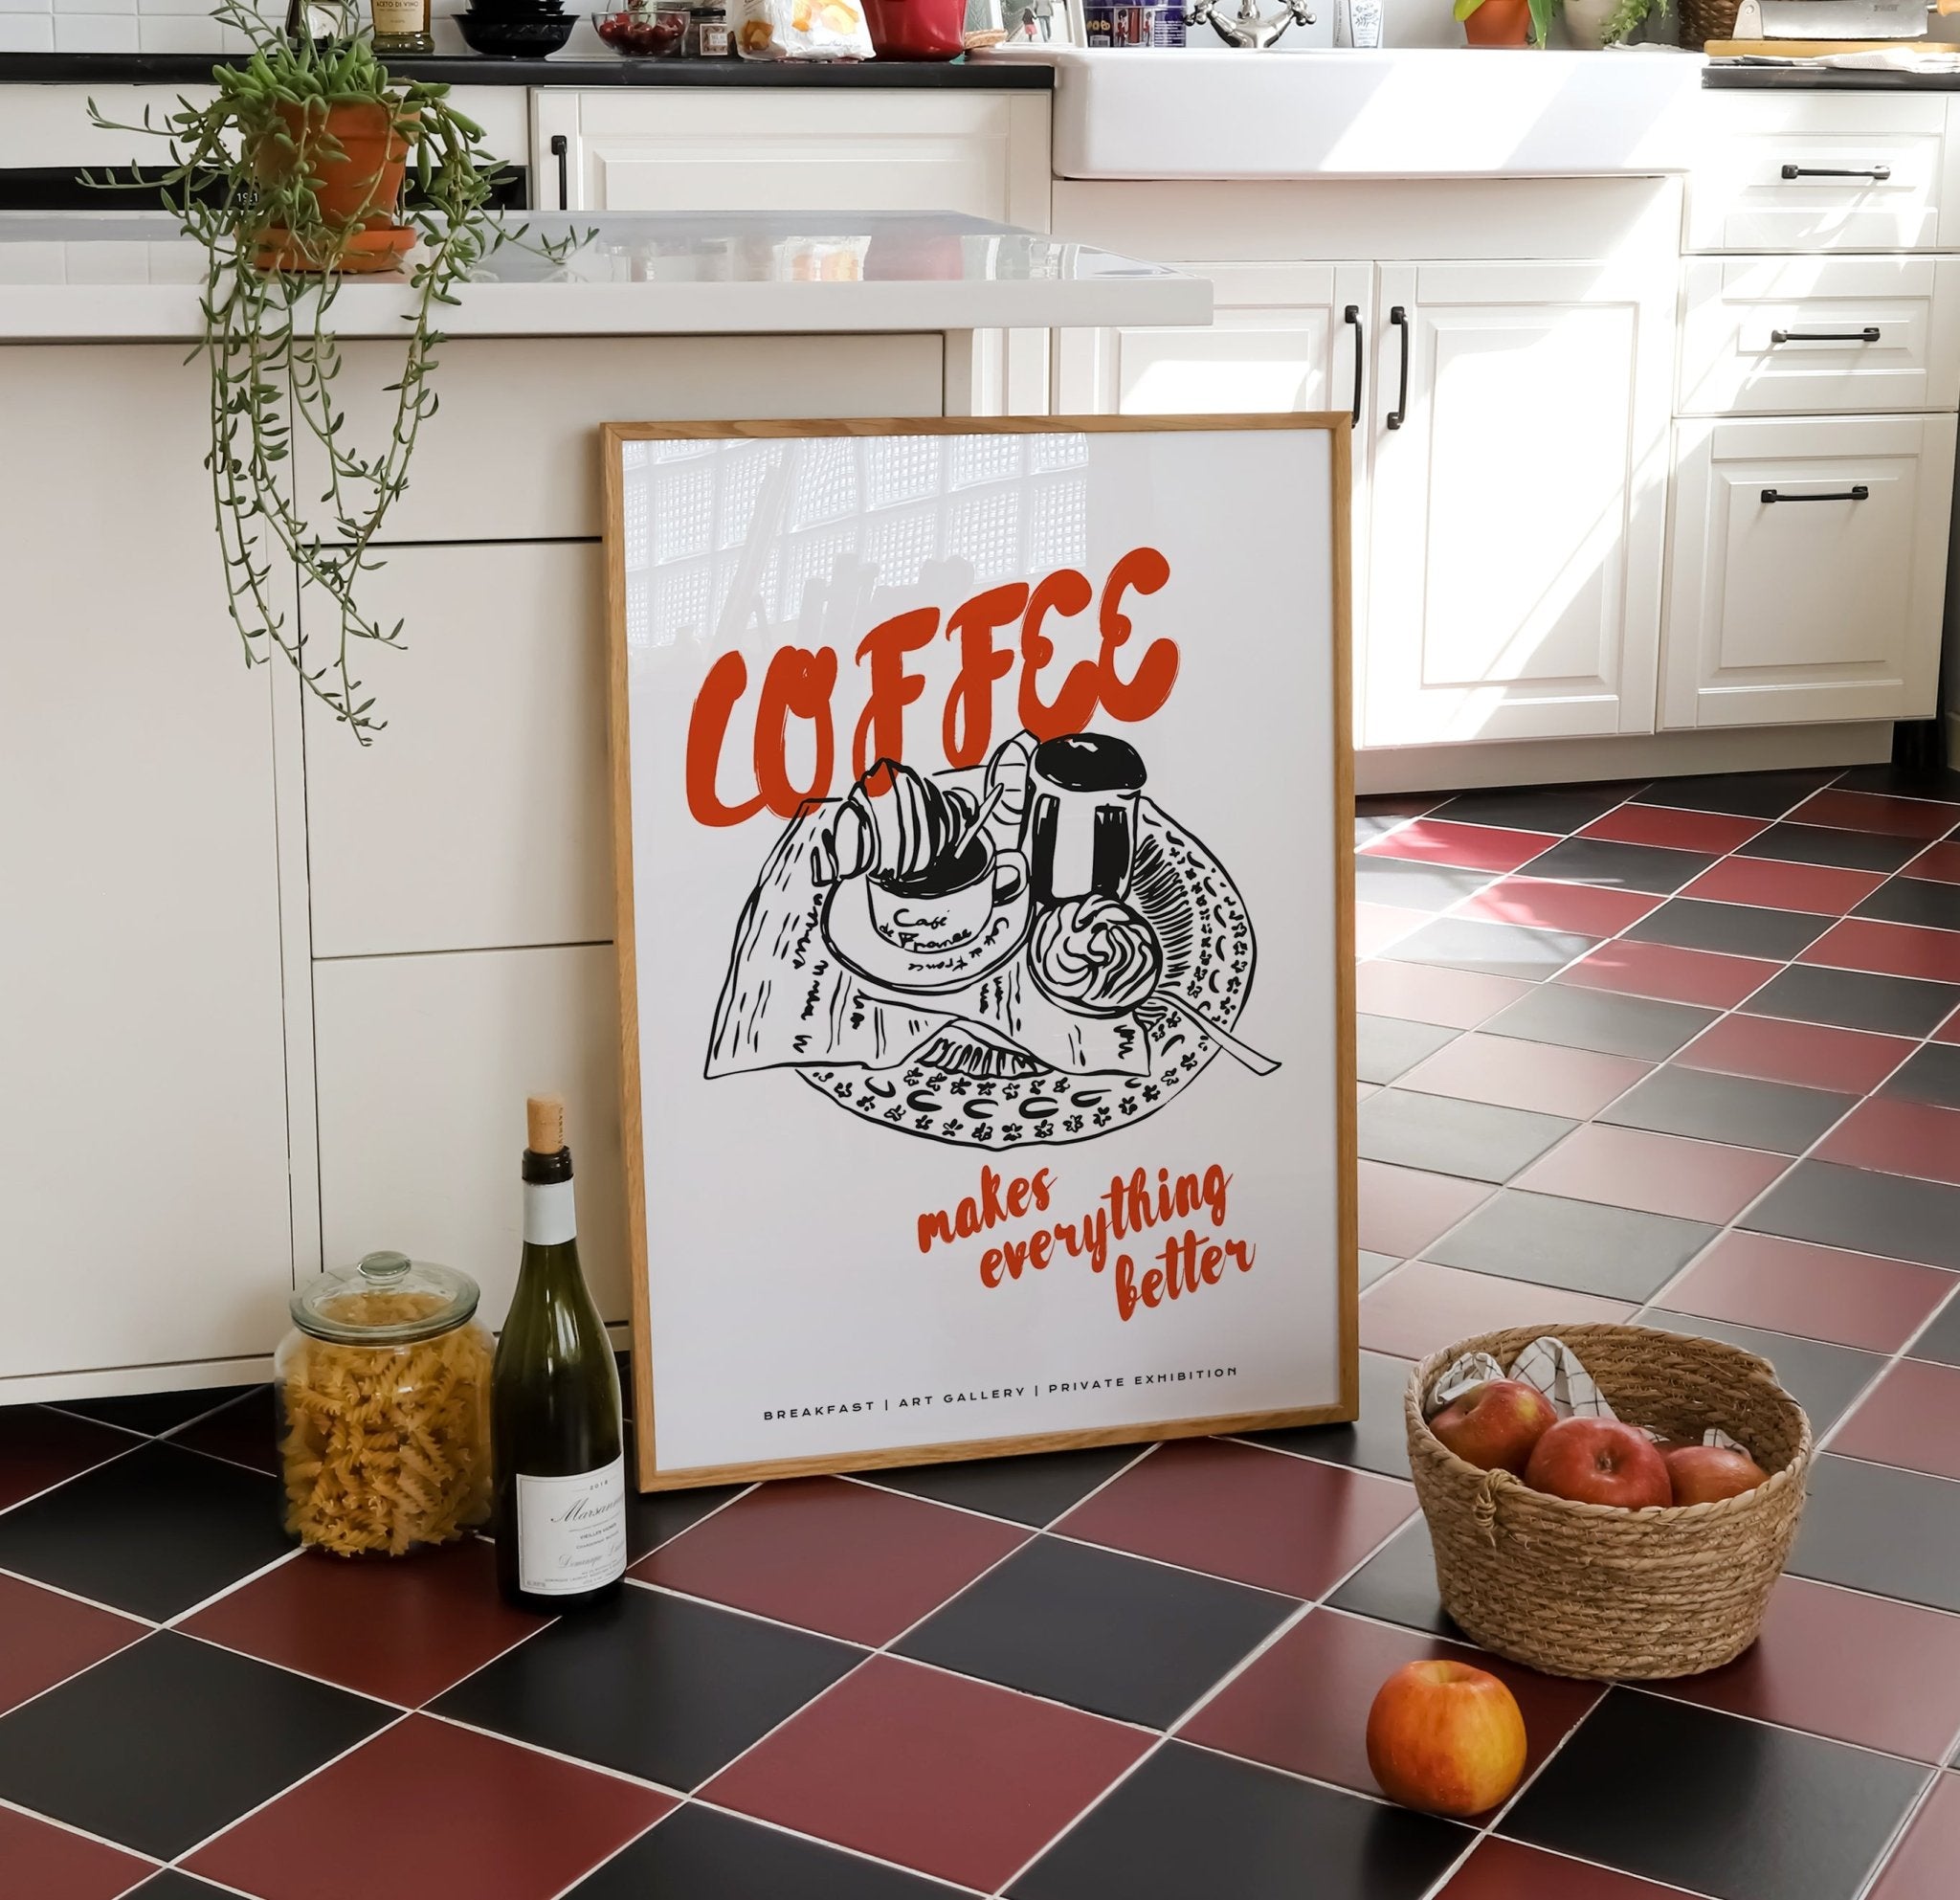 Coffee Makes Everything Better Print